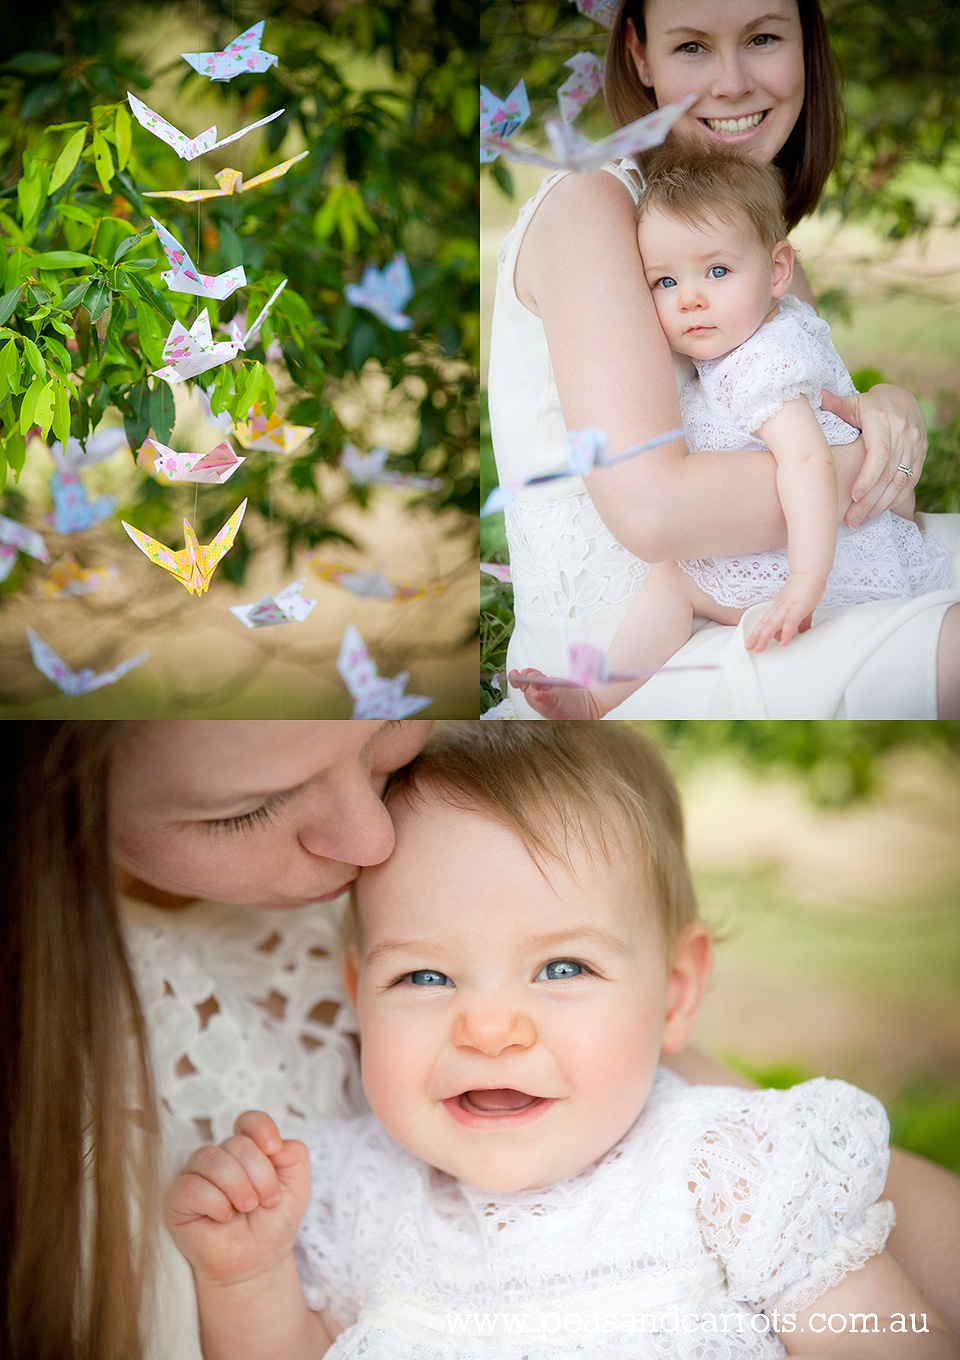 Brisbane Baby Photography, Mummy and Daughter portrait session 10 months old with paper baby birds hanging from the trees.  Childrens portrait photographer Nikki Joyner AIPP accredited professional photographer.  Brisbane, Dayboro and Samford Baby, Childr